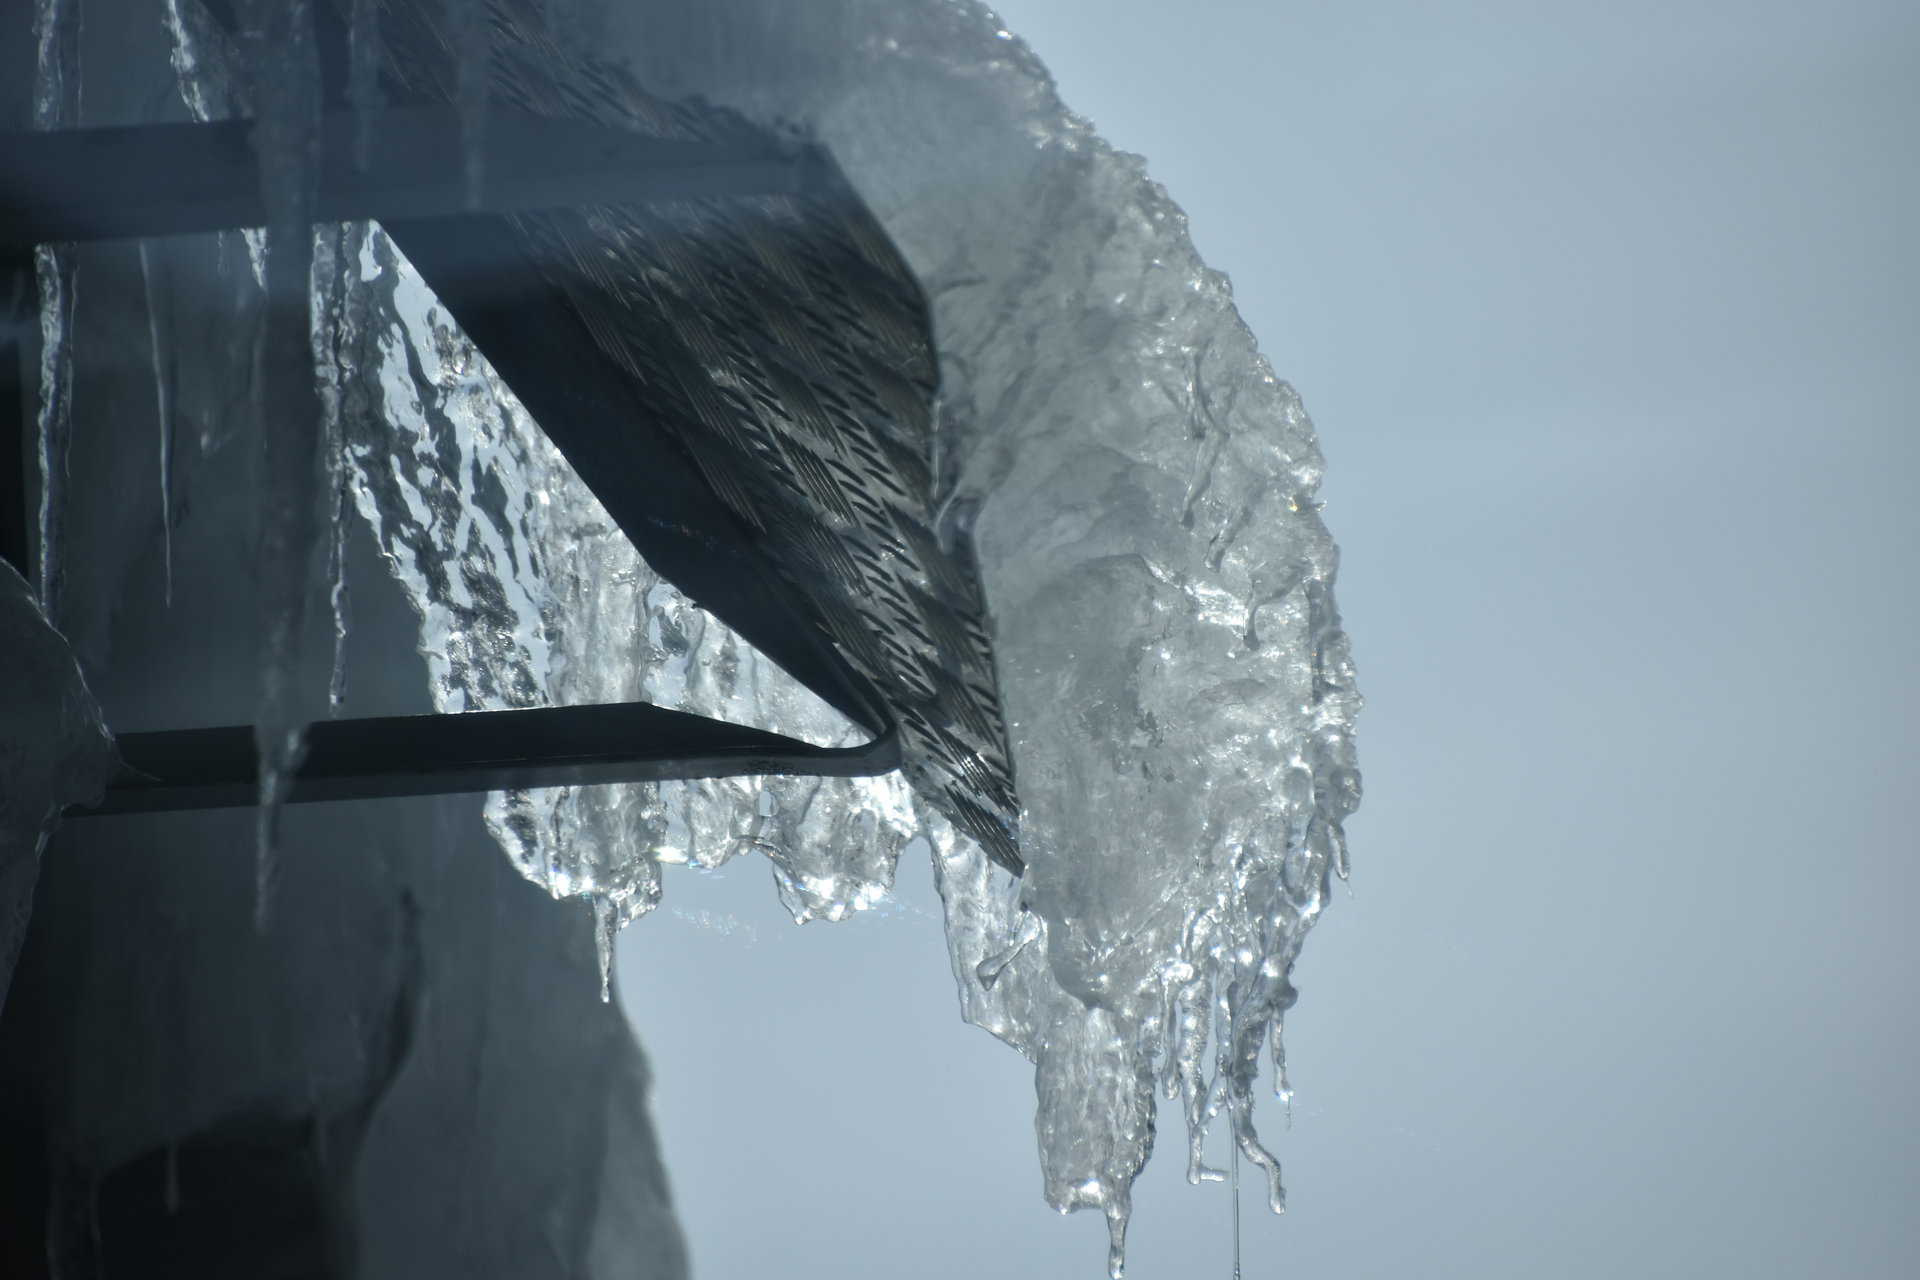 icicles at the Punta Helbronner, the highest point of the Skyway of Monte Bianco, Italy